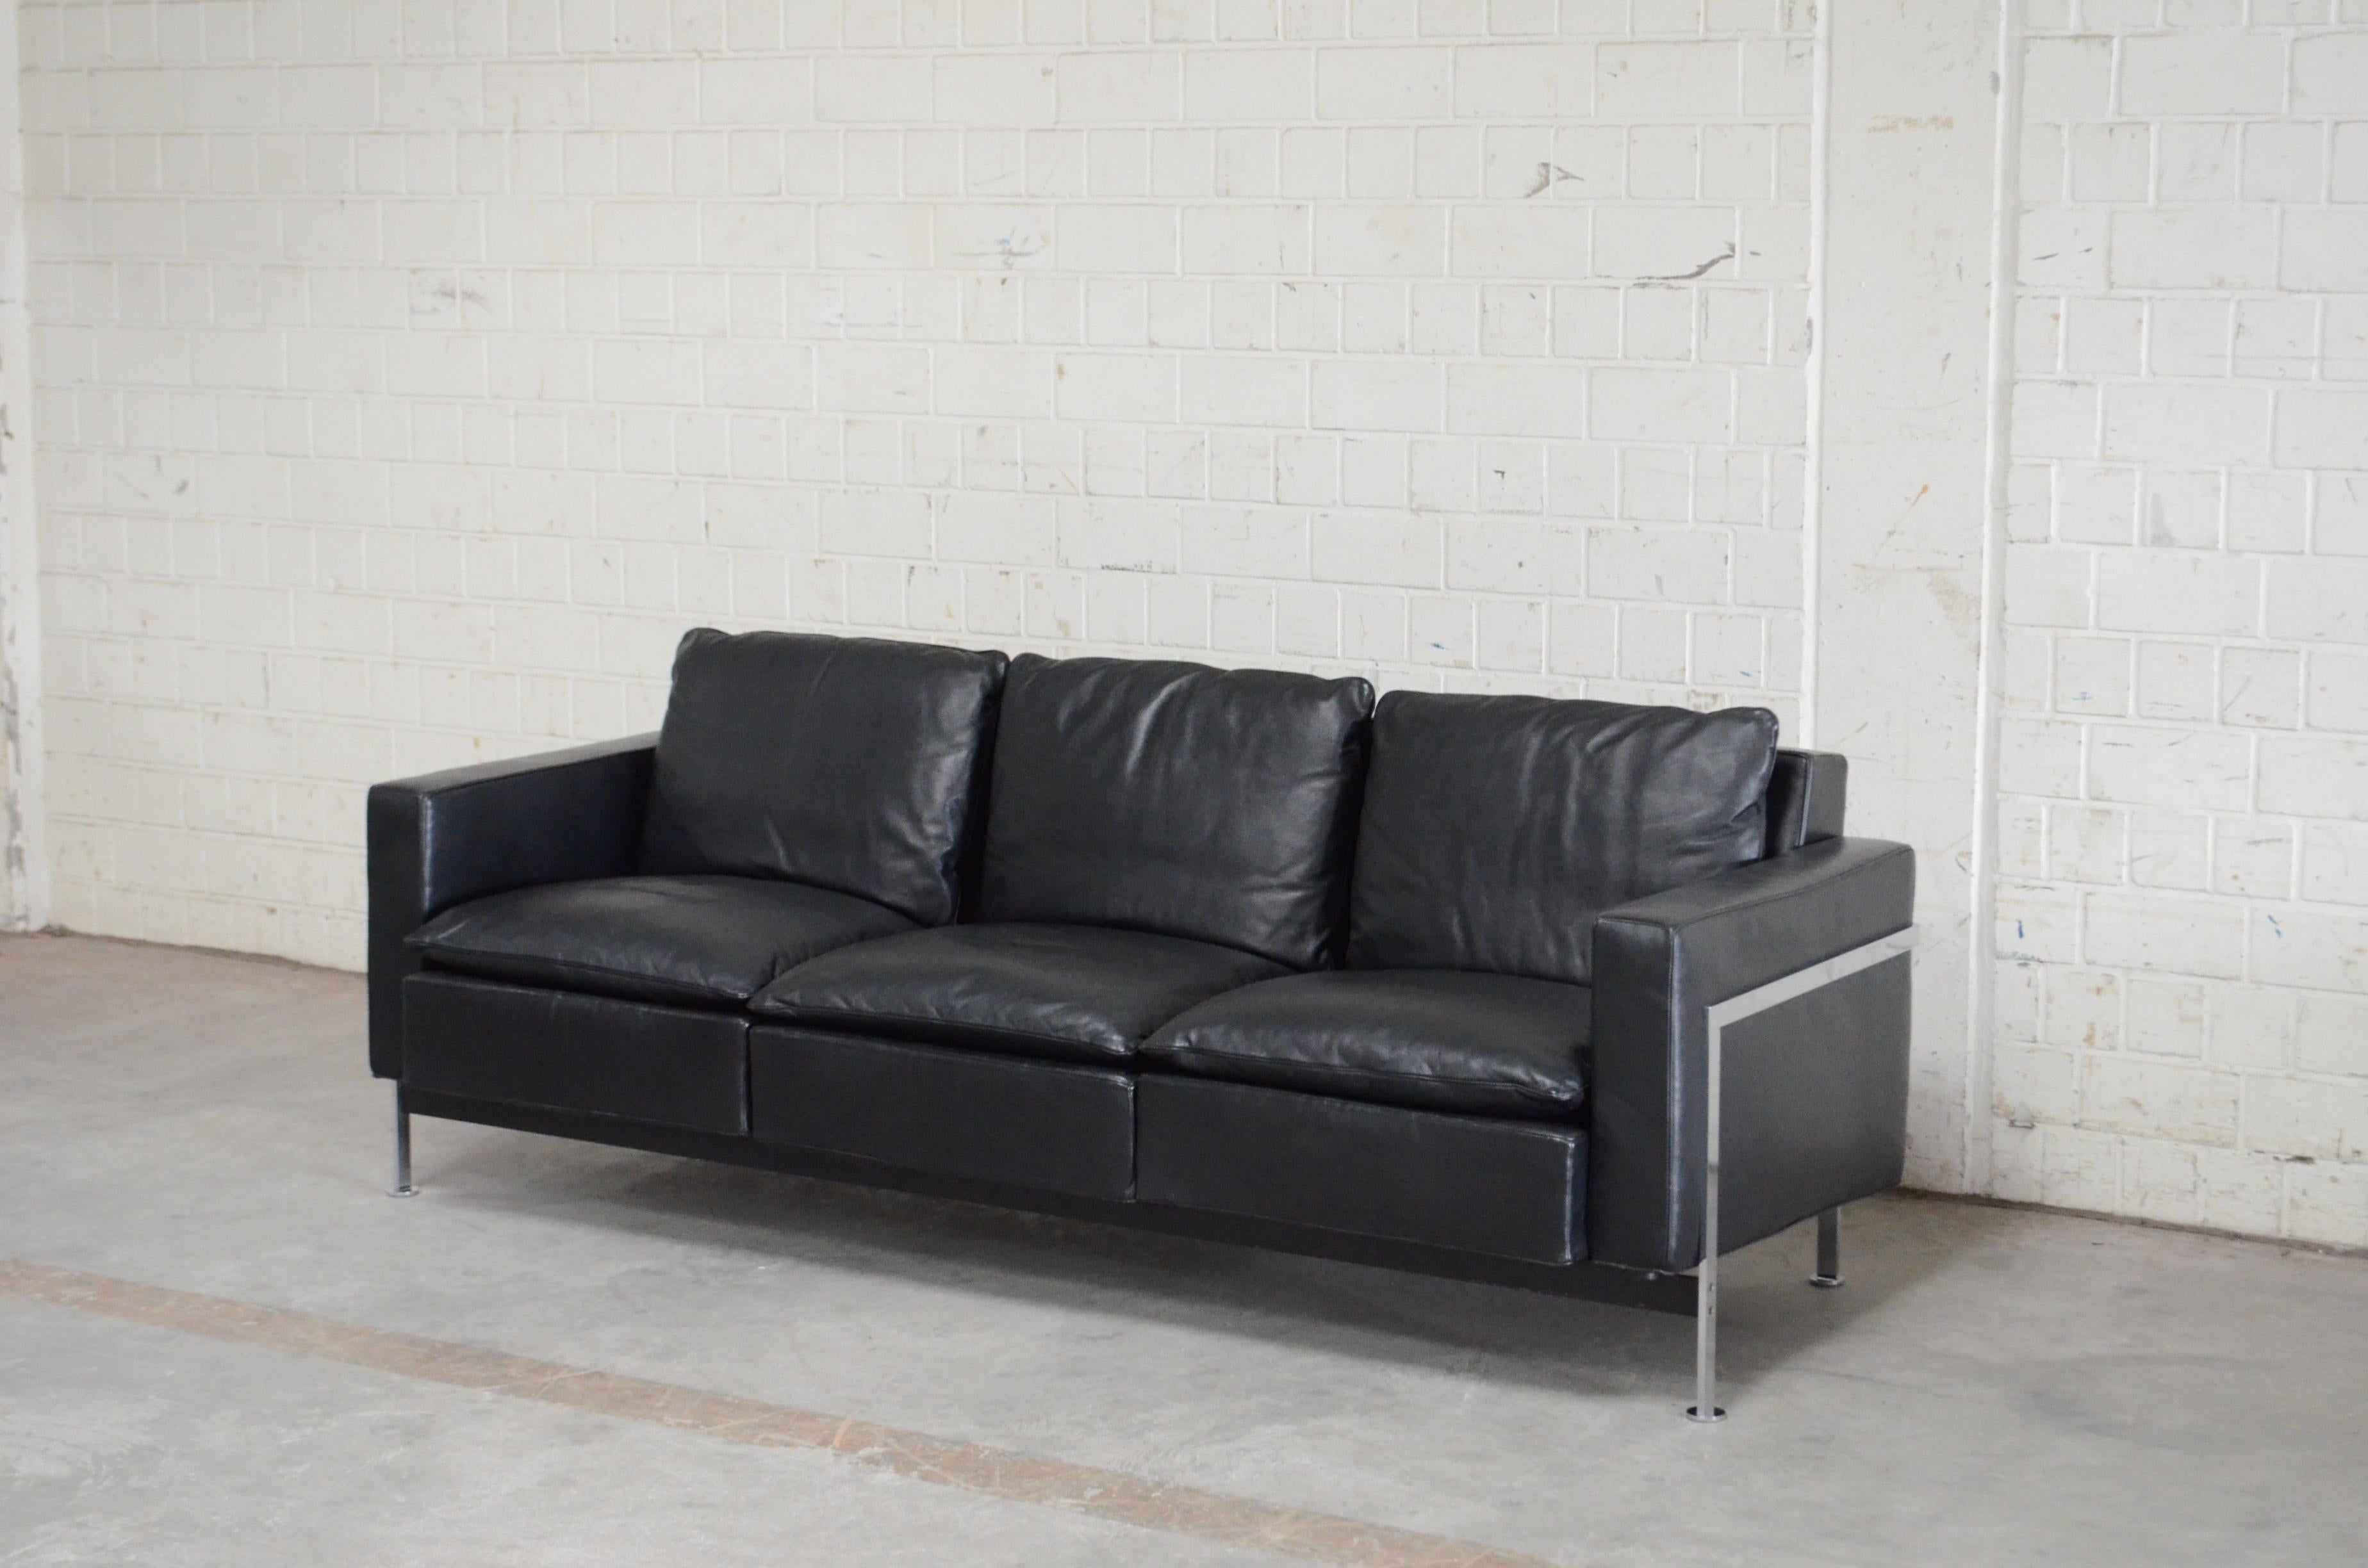 Robert Haussmann for Hans Kaufeld or De Sede RH 302 Leather Sofa First Edition In Good Condition For Sale In Munich, Bavaria